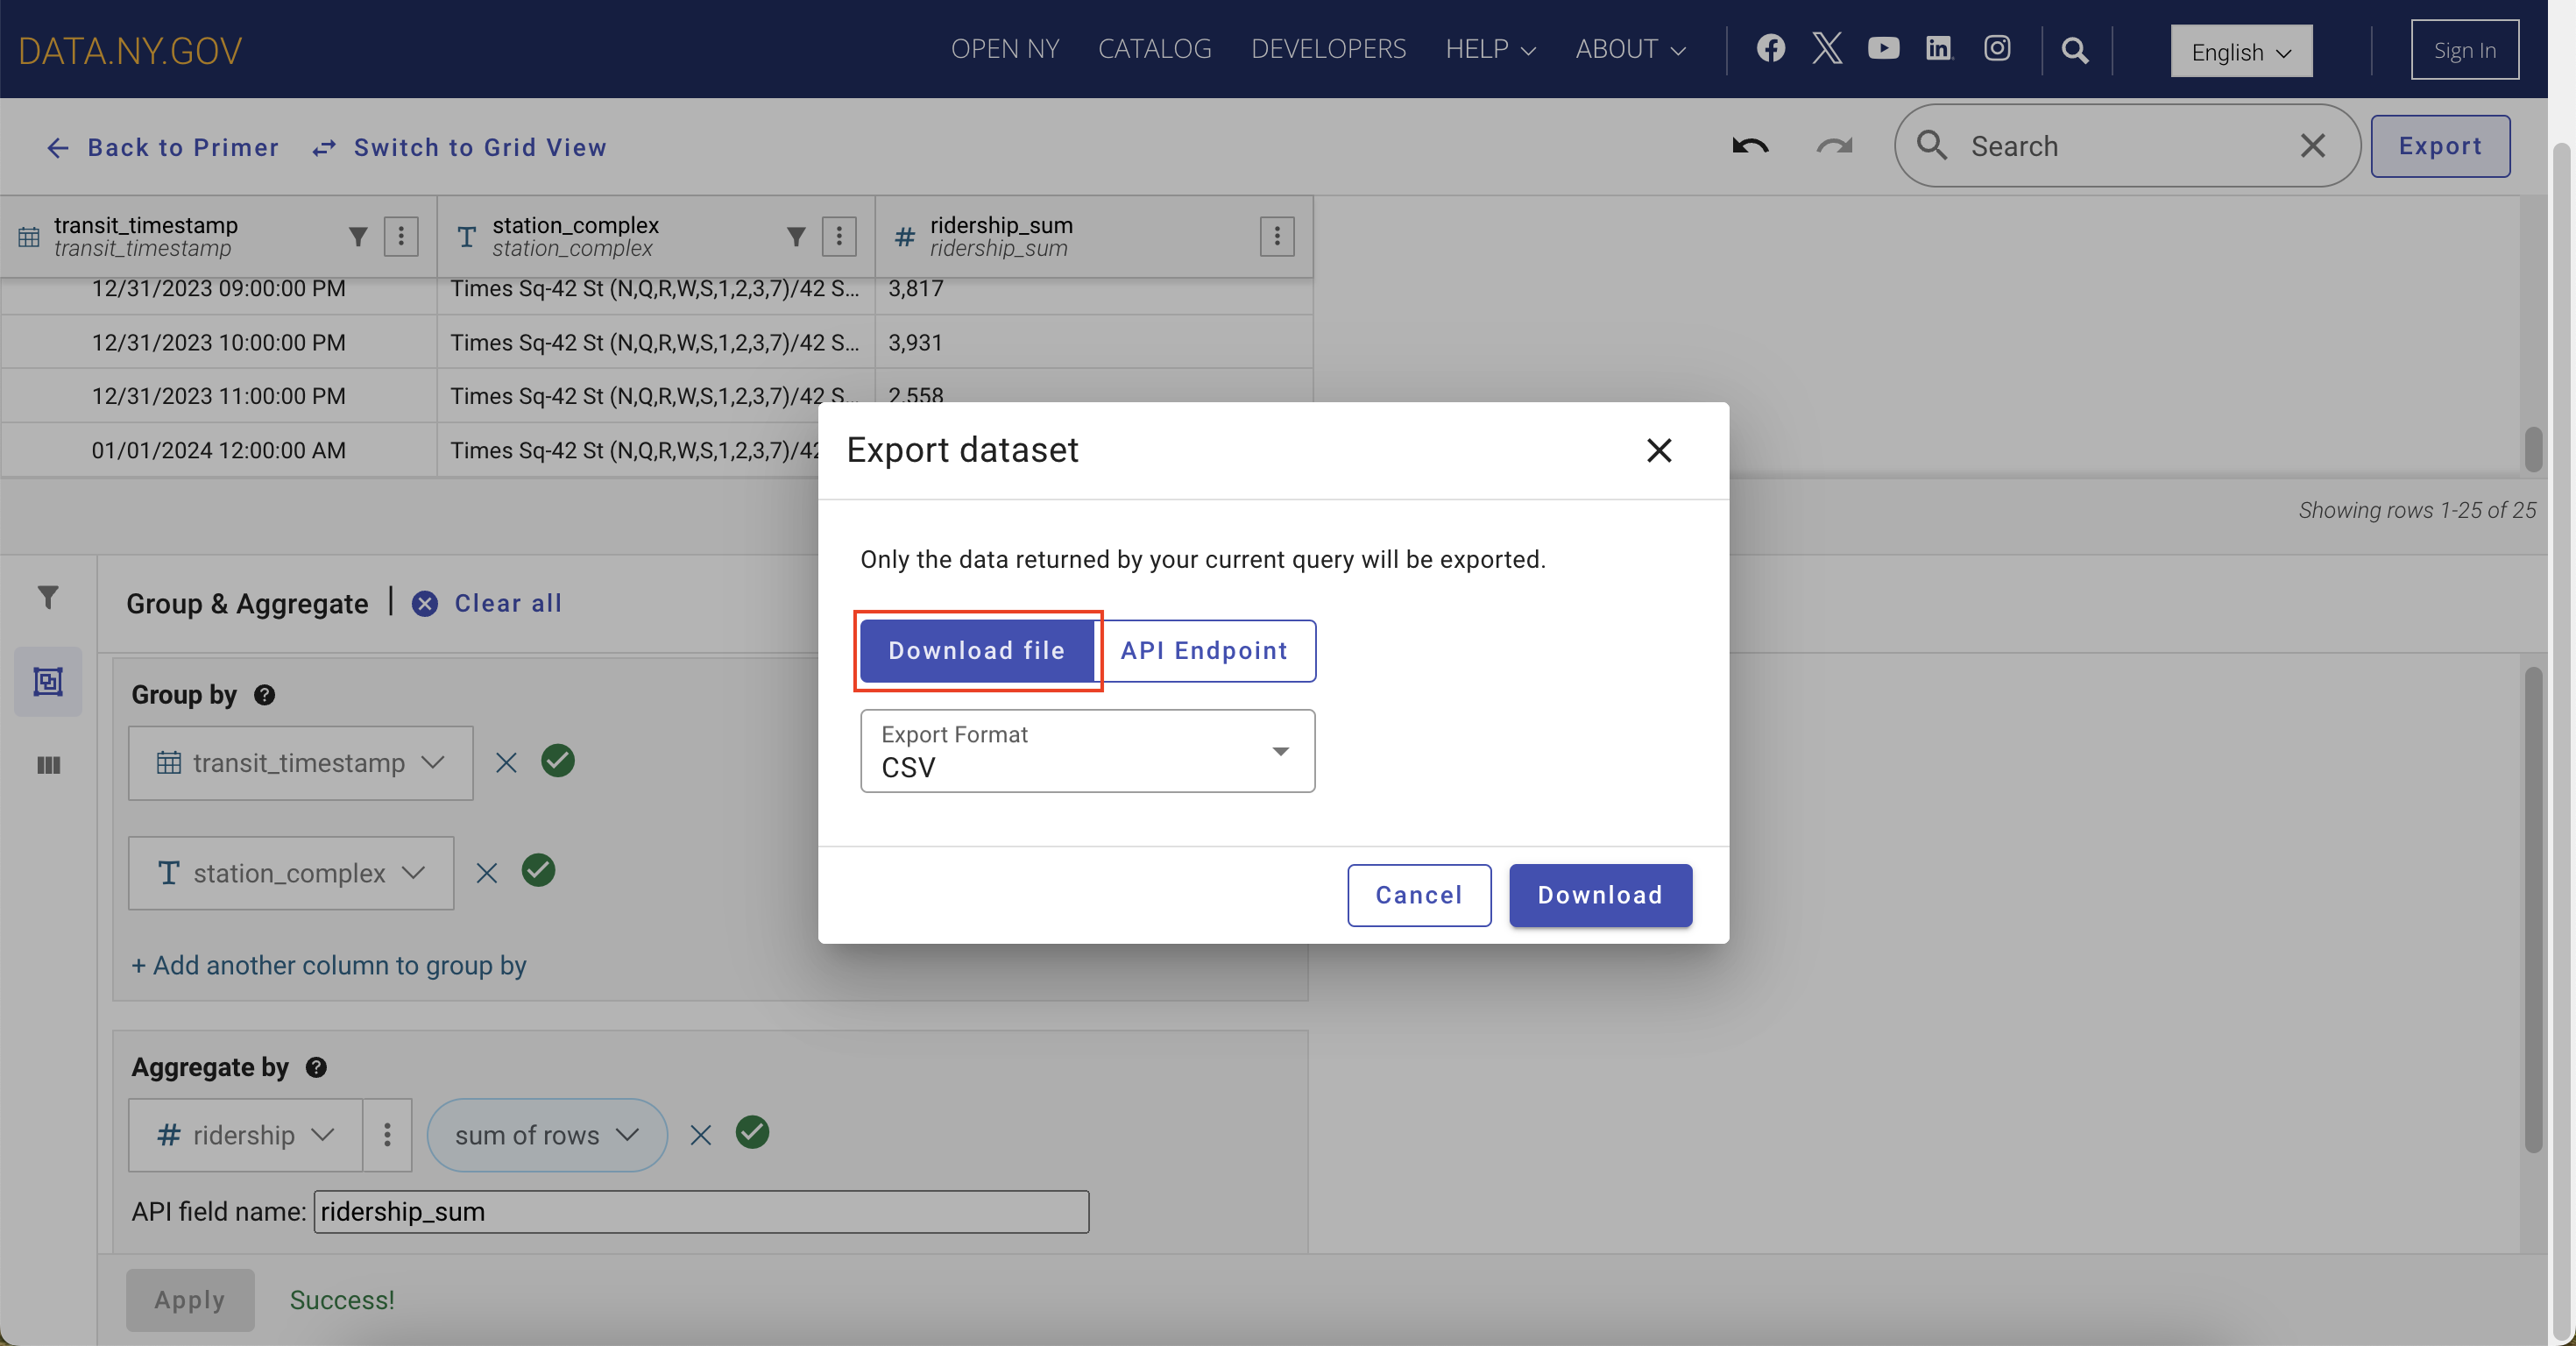 Screenshot of the New York State Open Data website showing the Export dataset pop-up with Download file selected